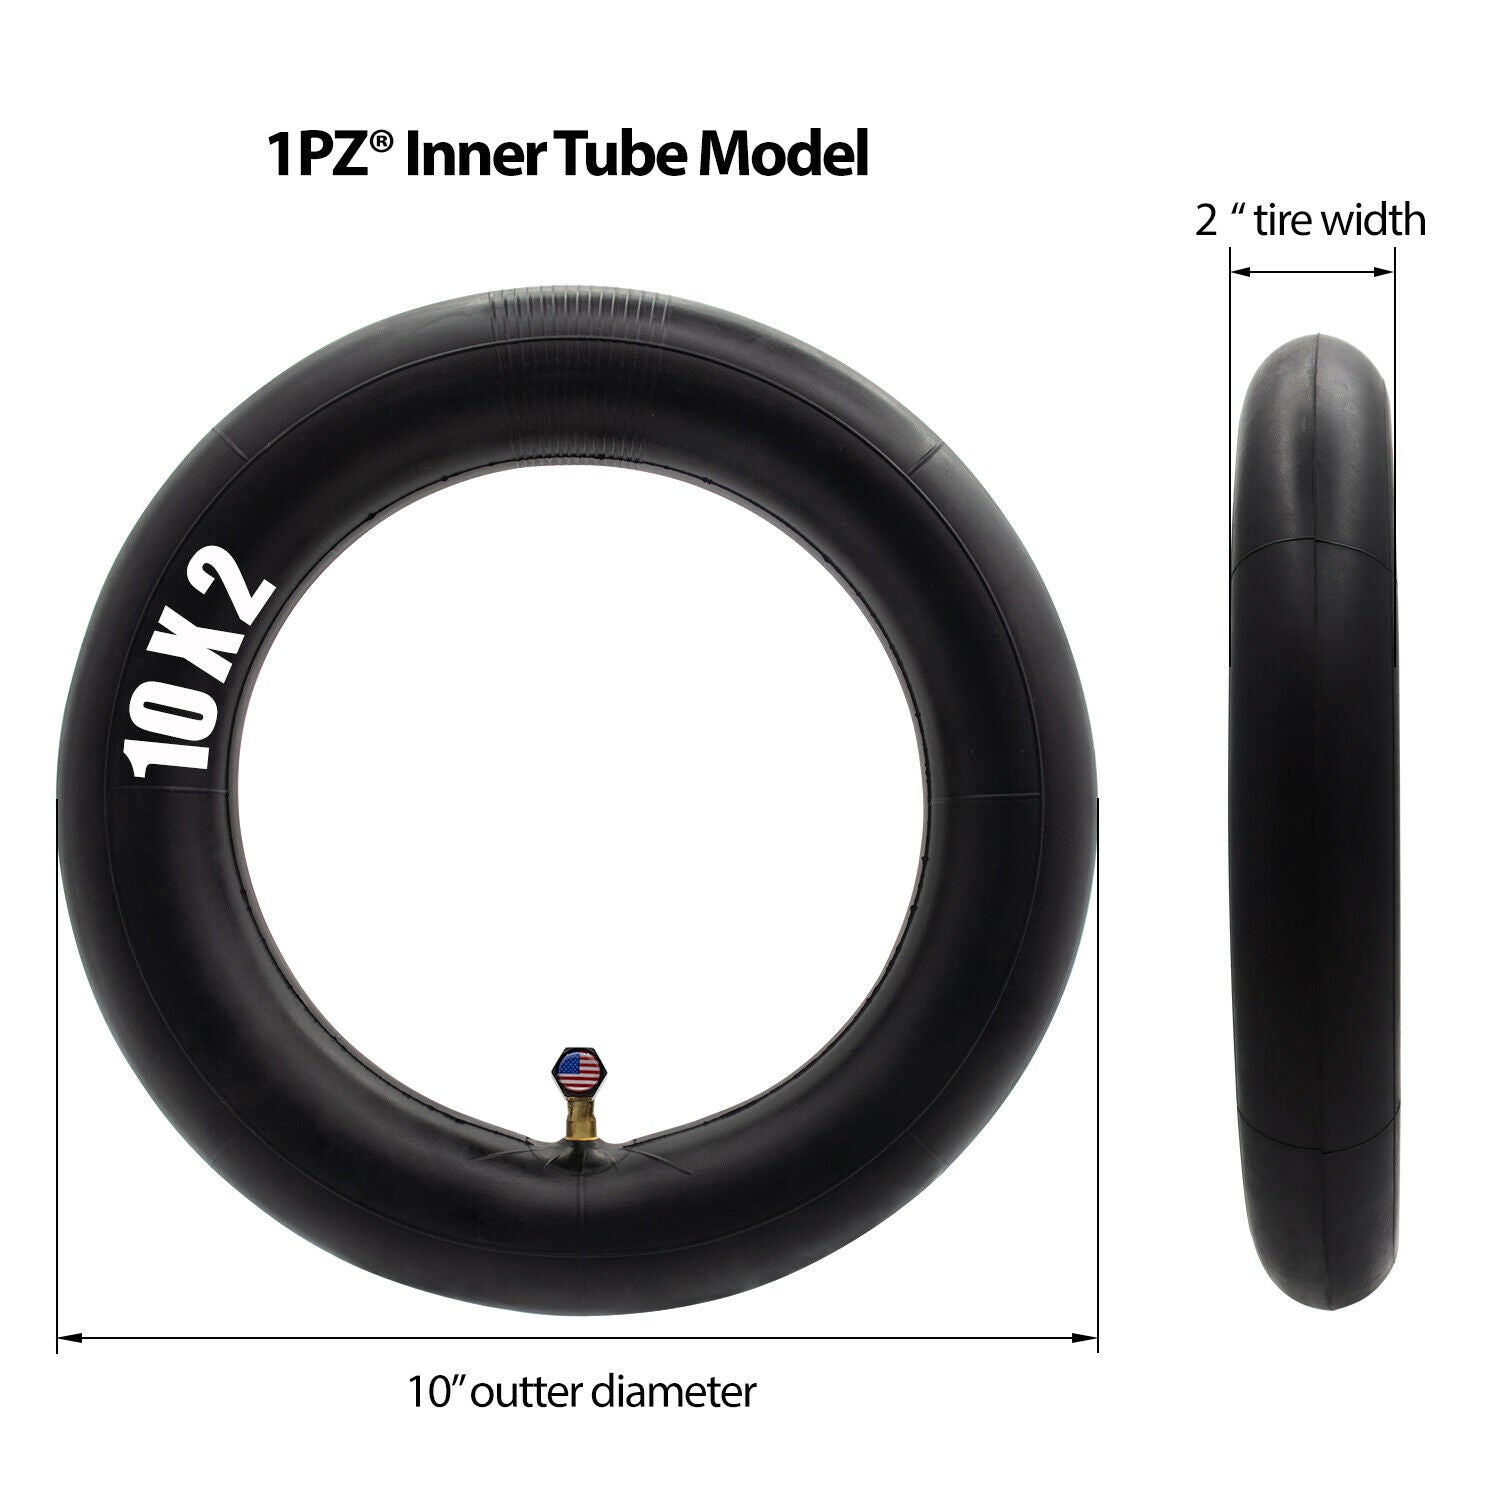 1PZ Heavy Duty 10 x 2.125/10 x 2 Tire Tyre & Tube with Bent Valve Stem for Smart Electric Balance Scooter Stroller Bicycle 10" inch Unicycle